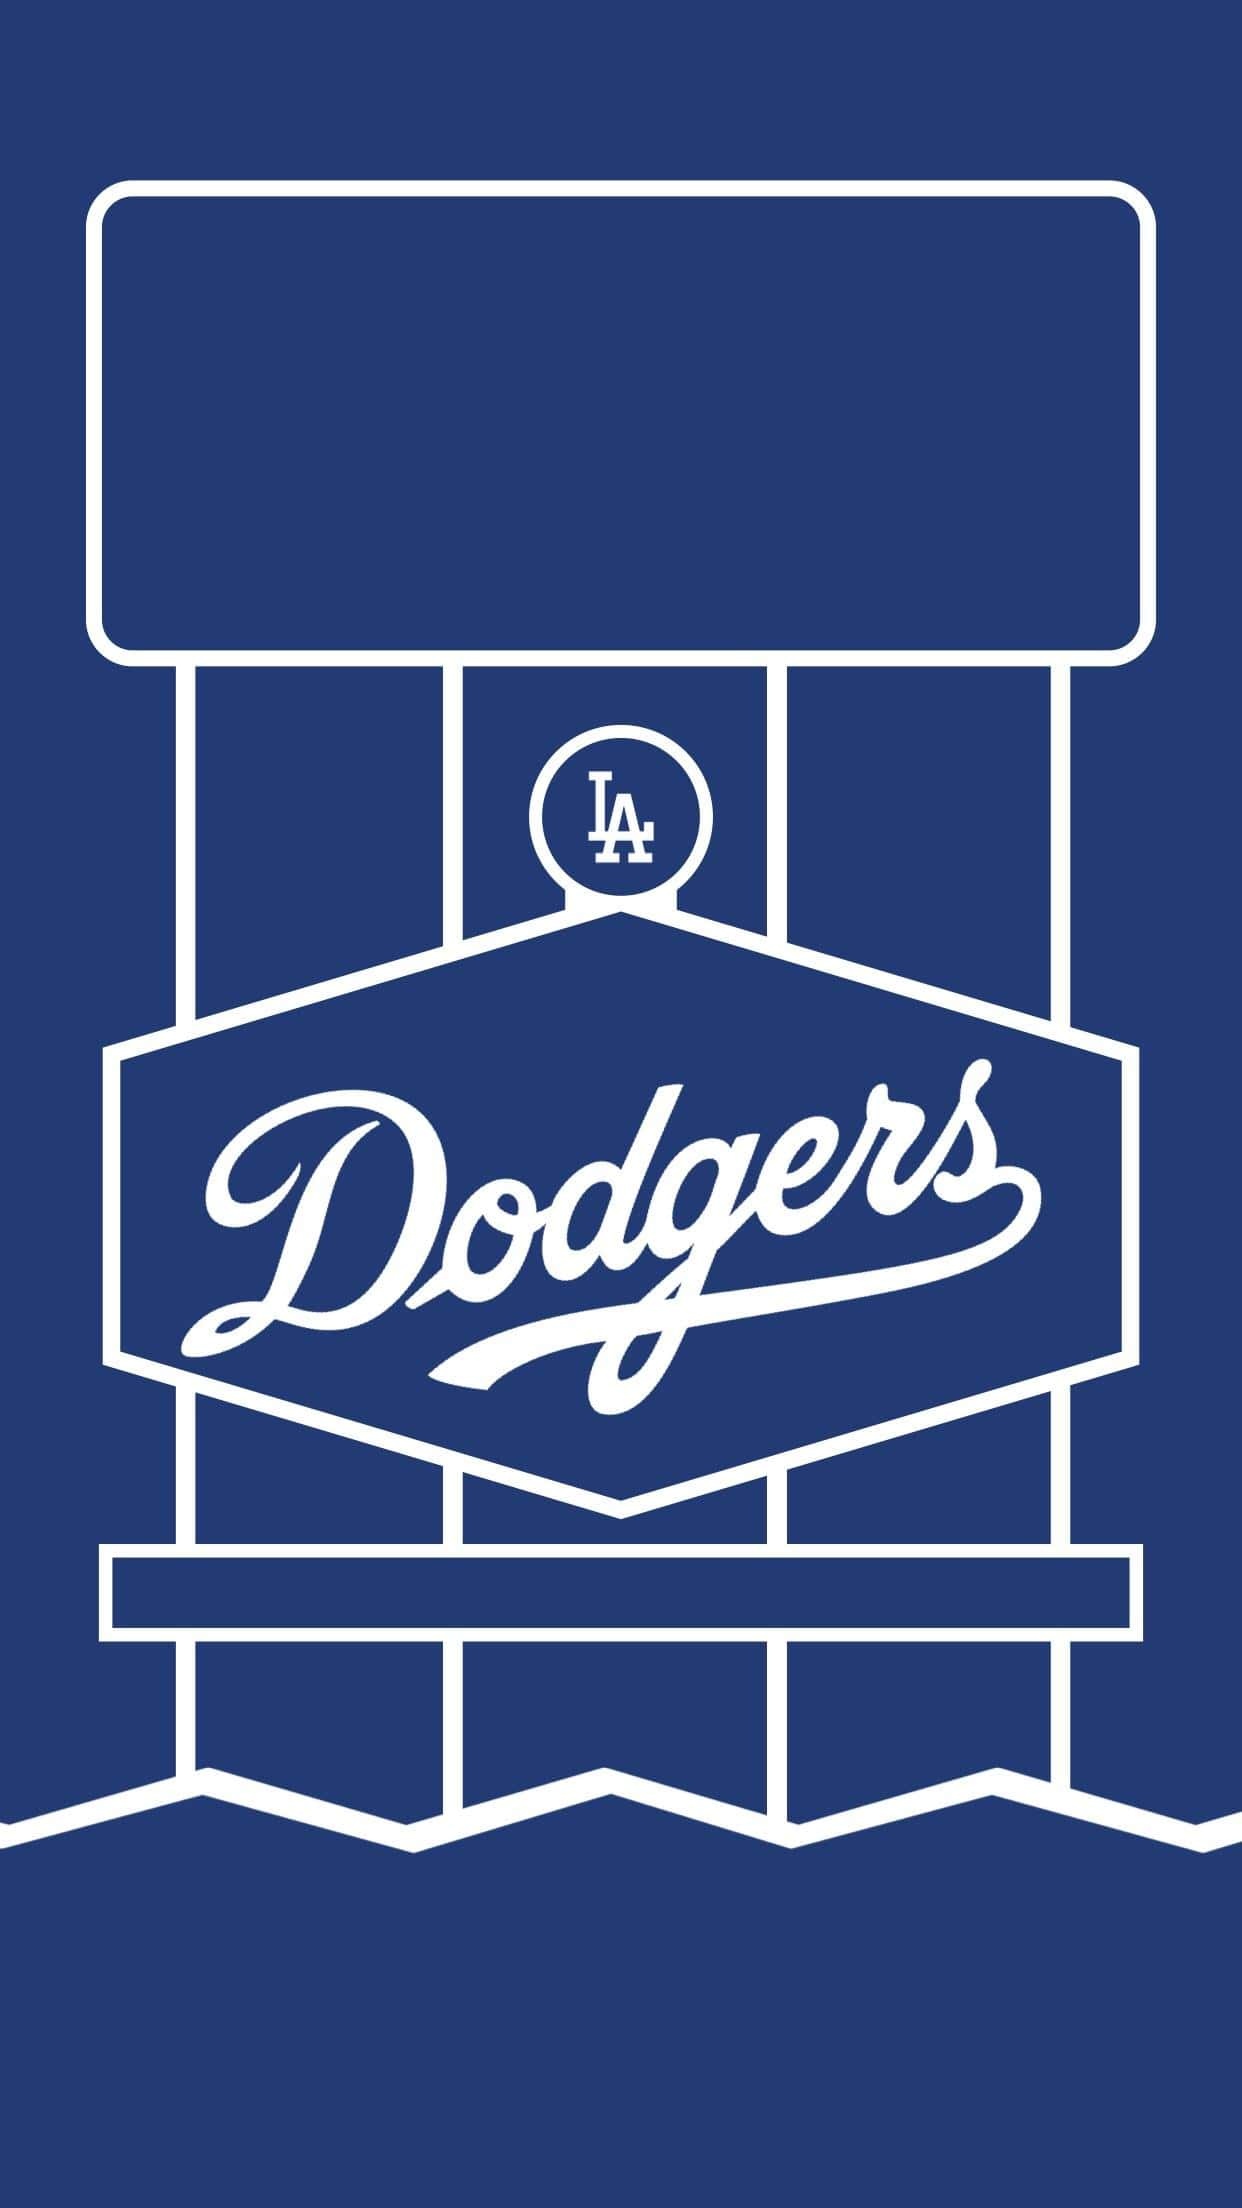 Dodgers HD Android wallpapers, Sports team pride, High-definition visuals, Dynamic gameplay, 1250x2210 HD Handy